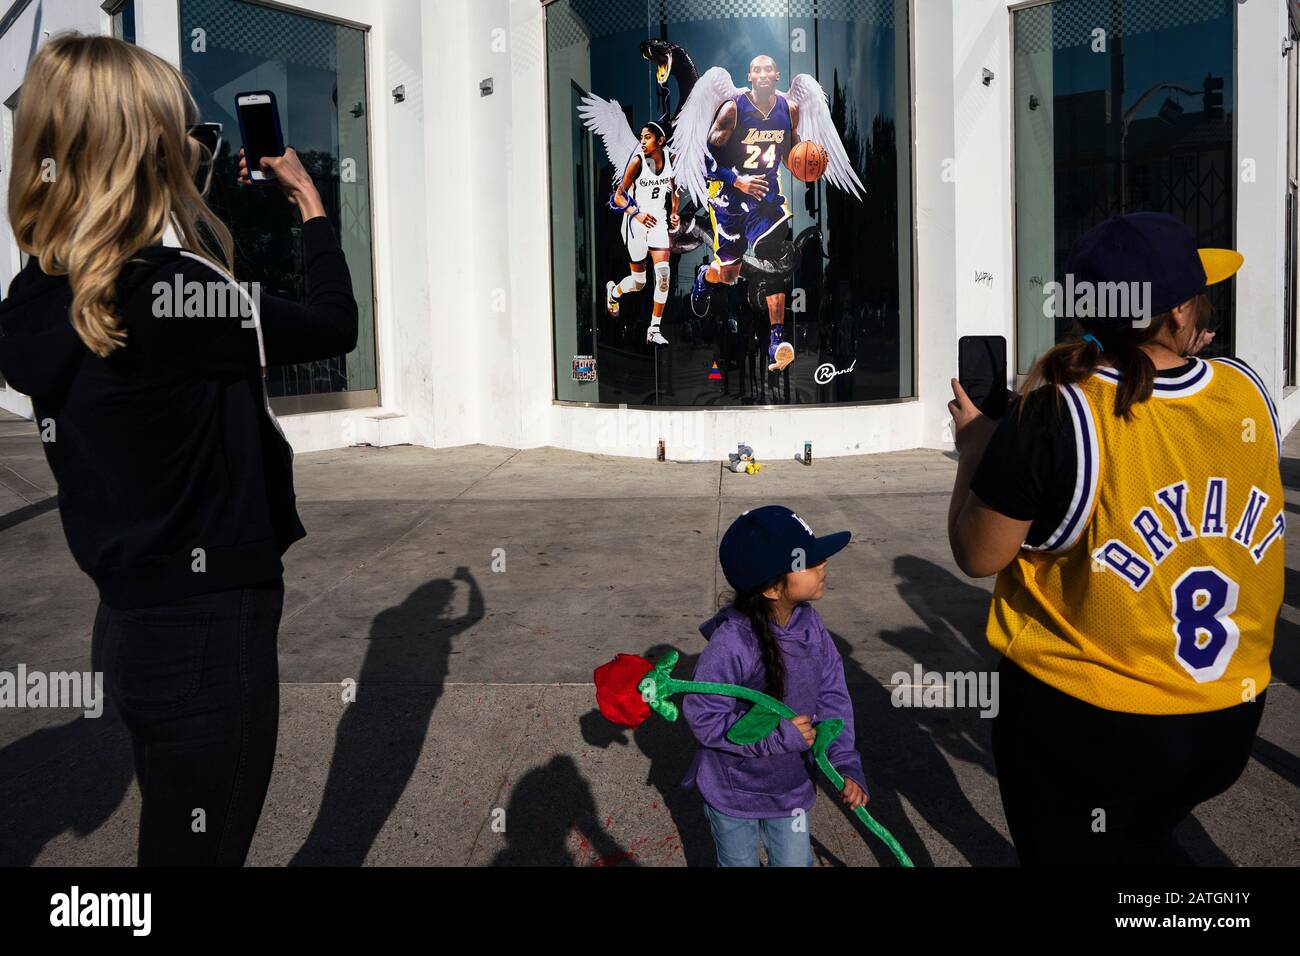 Los Angeles, United States. 02nd Feb, 2020. Kobe Bryant fans take pictures of an illustration of Bryant and his daughter during a makeshift memorial in honour of the former NBA star, Kobe Bryant, outside the Staples Center in Los Angeles.Kobe and his daughter Gianna were among the nine people who died in a helicopter crash. Credit: SOPA Images Limited/Alamy Live News Stock Photo